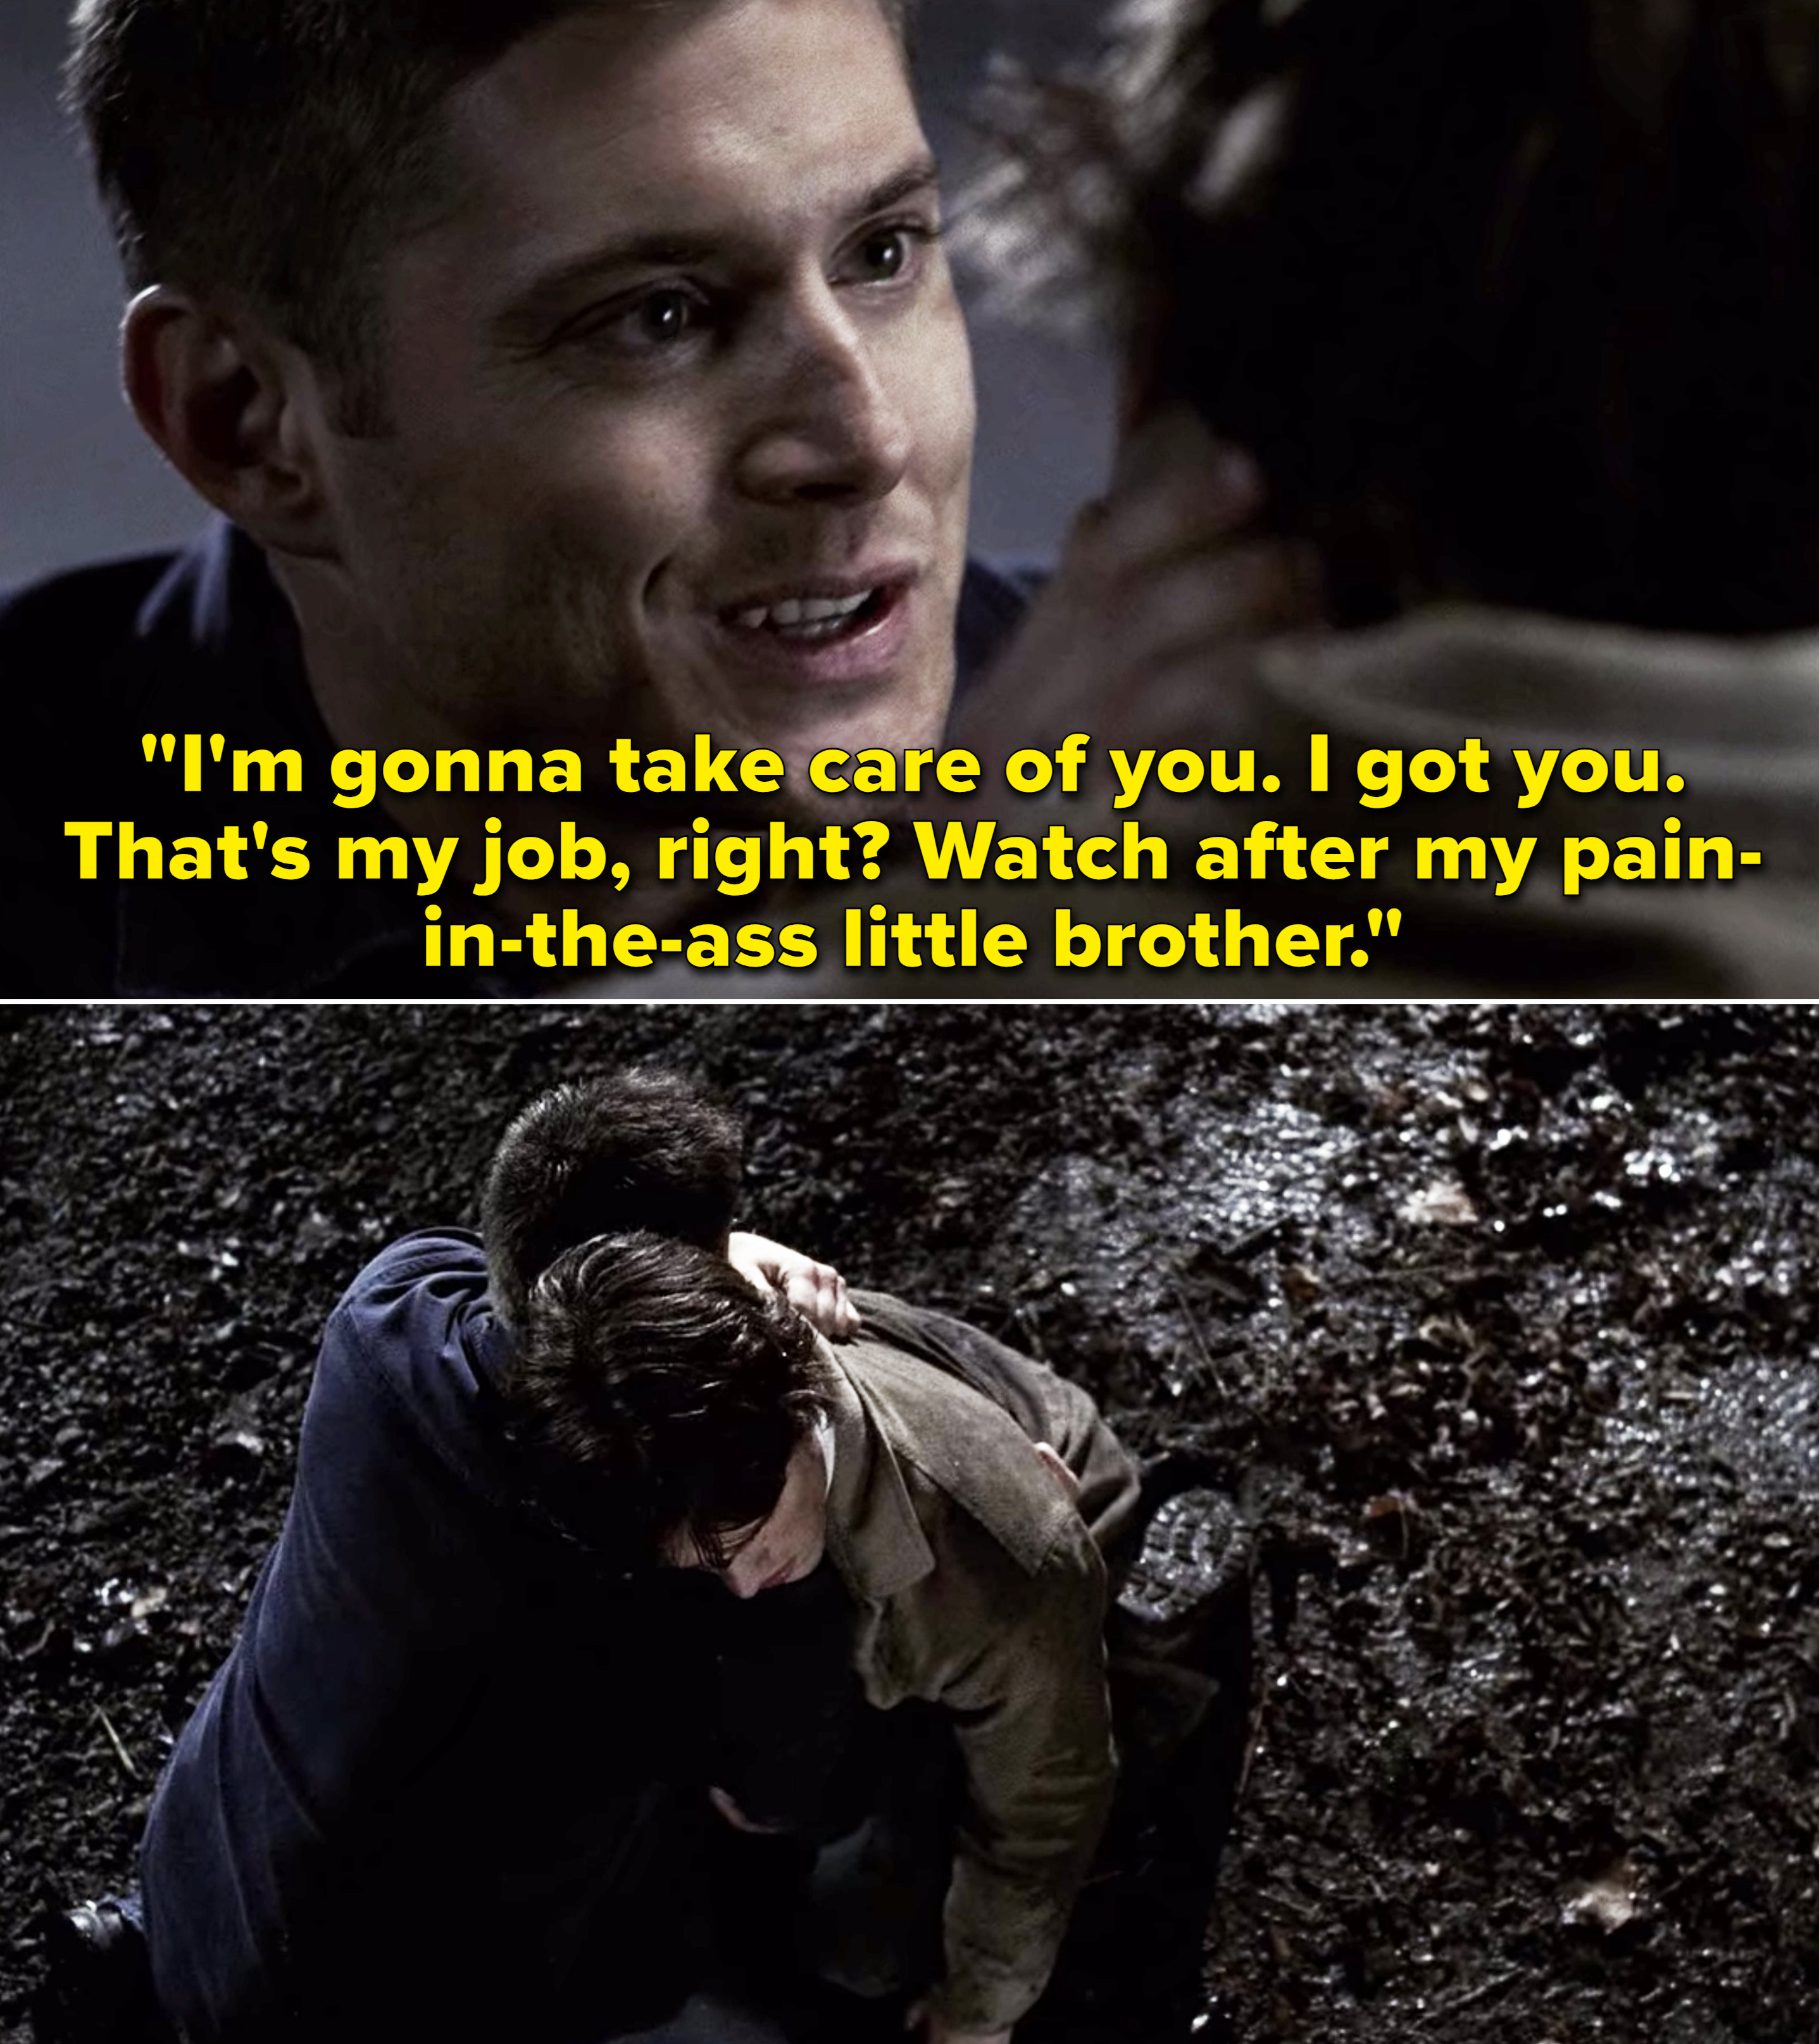 Dean telling Sam, &quot;I&#x27;m gonna take care of you. I got you. That&#x27;s my job, right? Watch after my pain-in-the-ass little brother&quot;